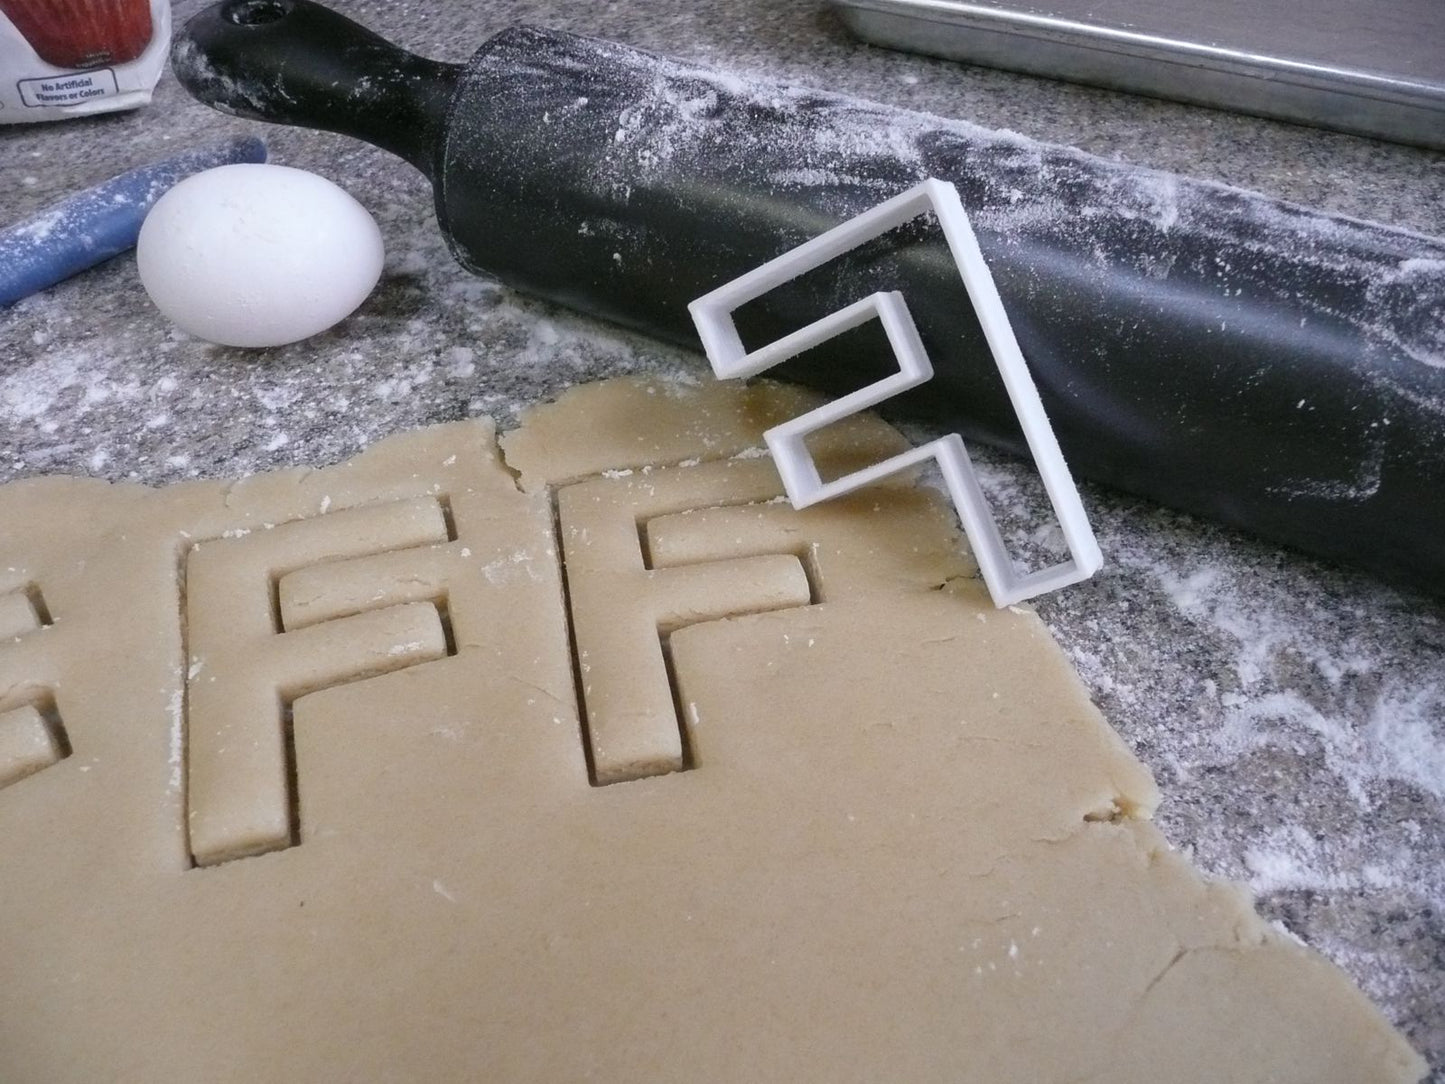 Letter F Initial Alphabet Letters Cookie Cutter Baking Tool USA PR107F